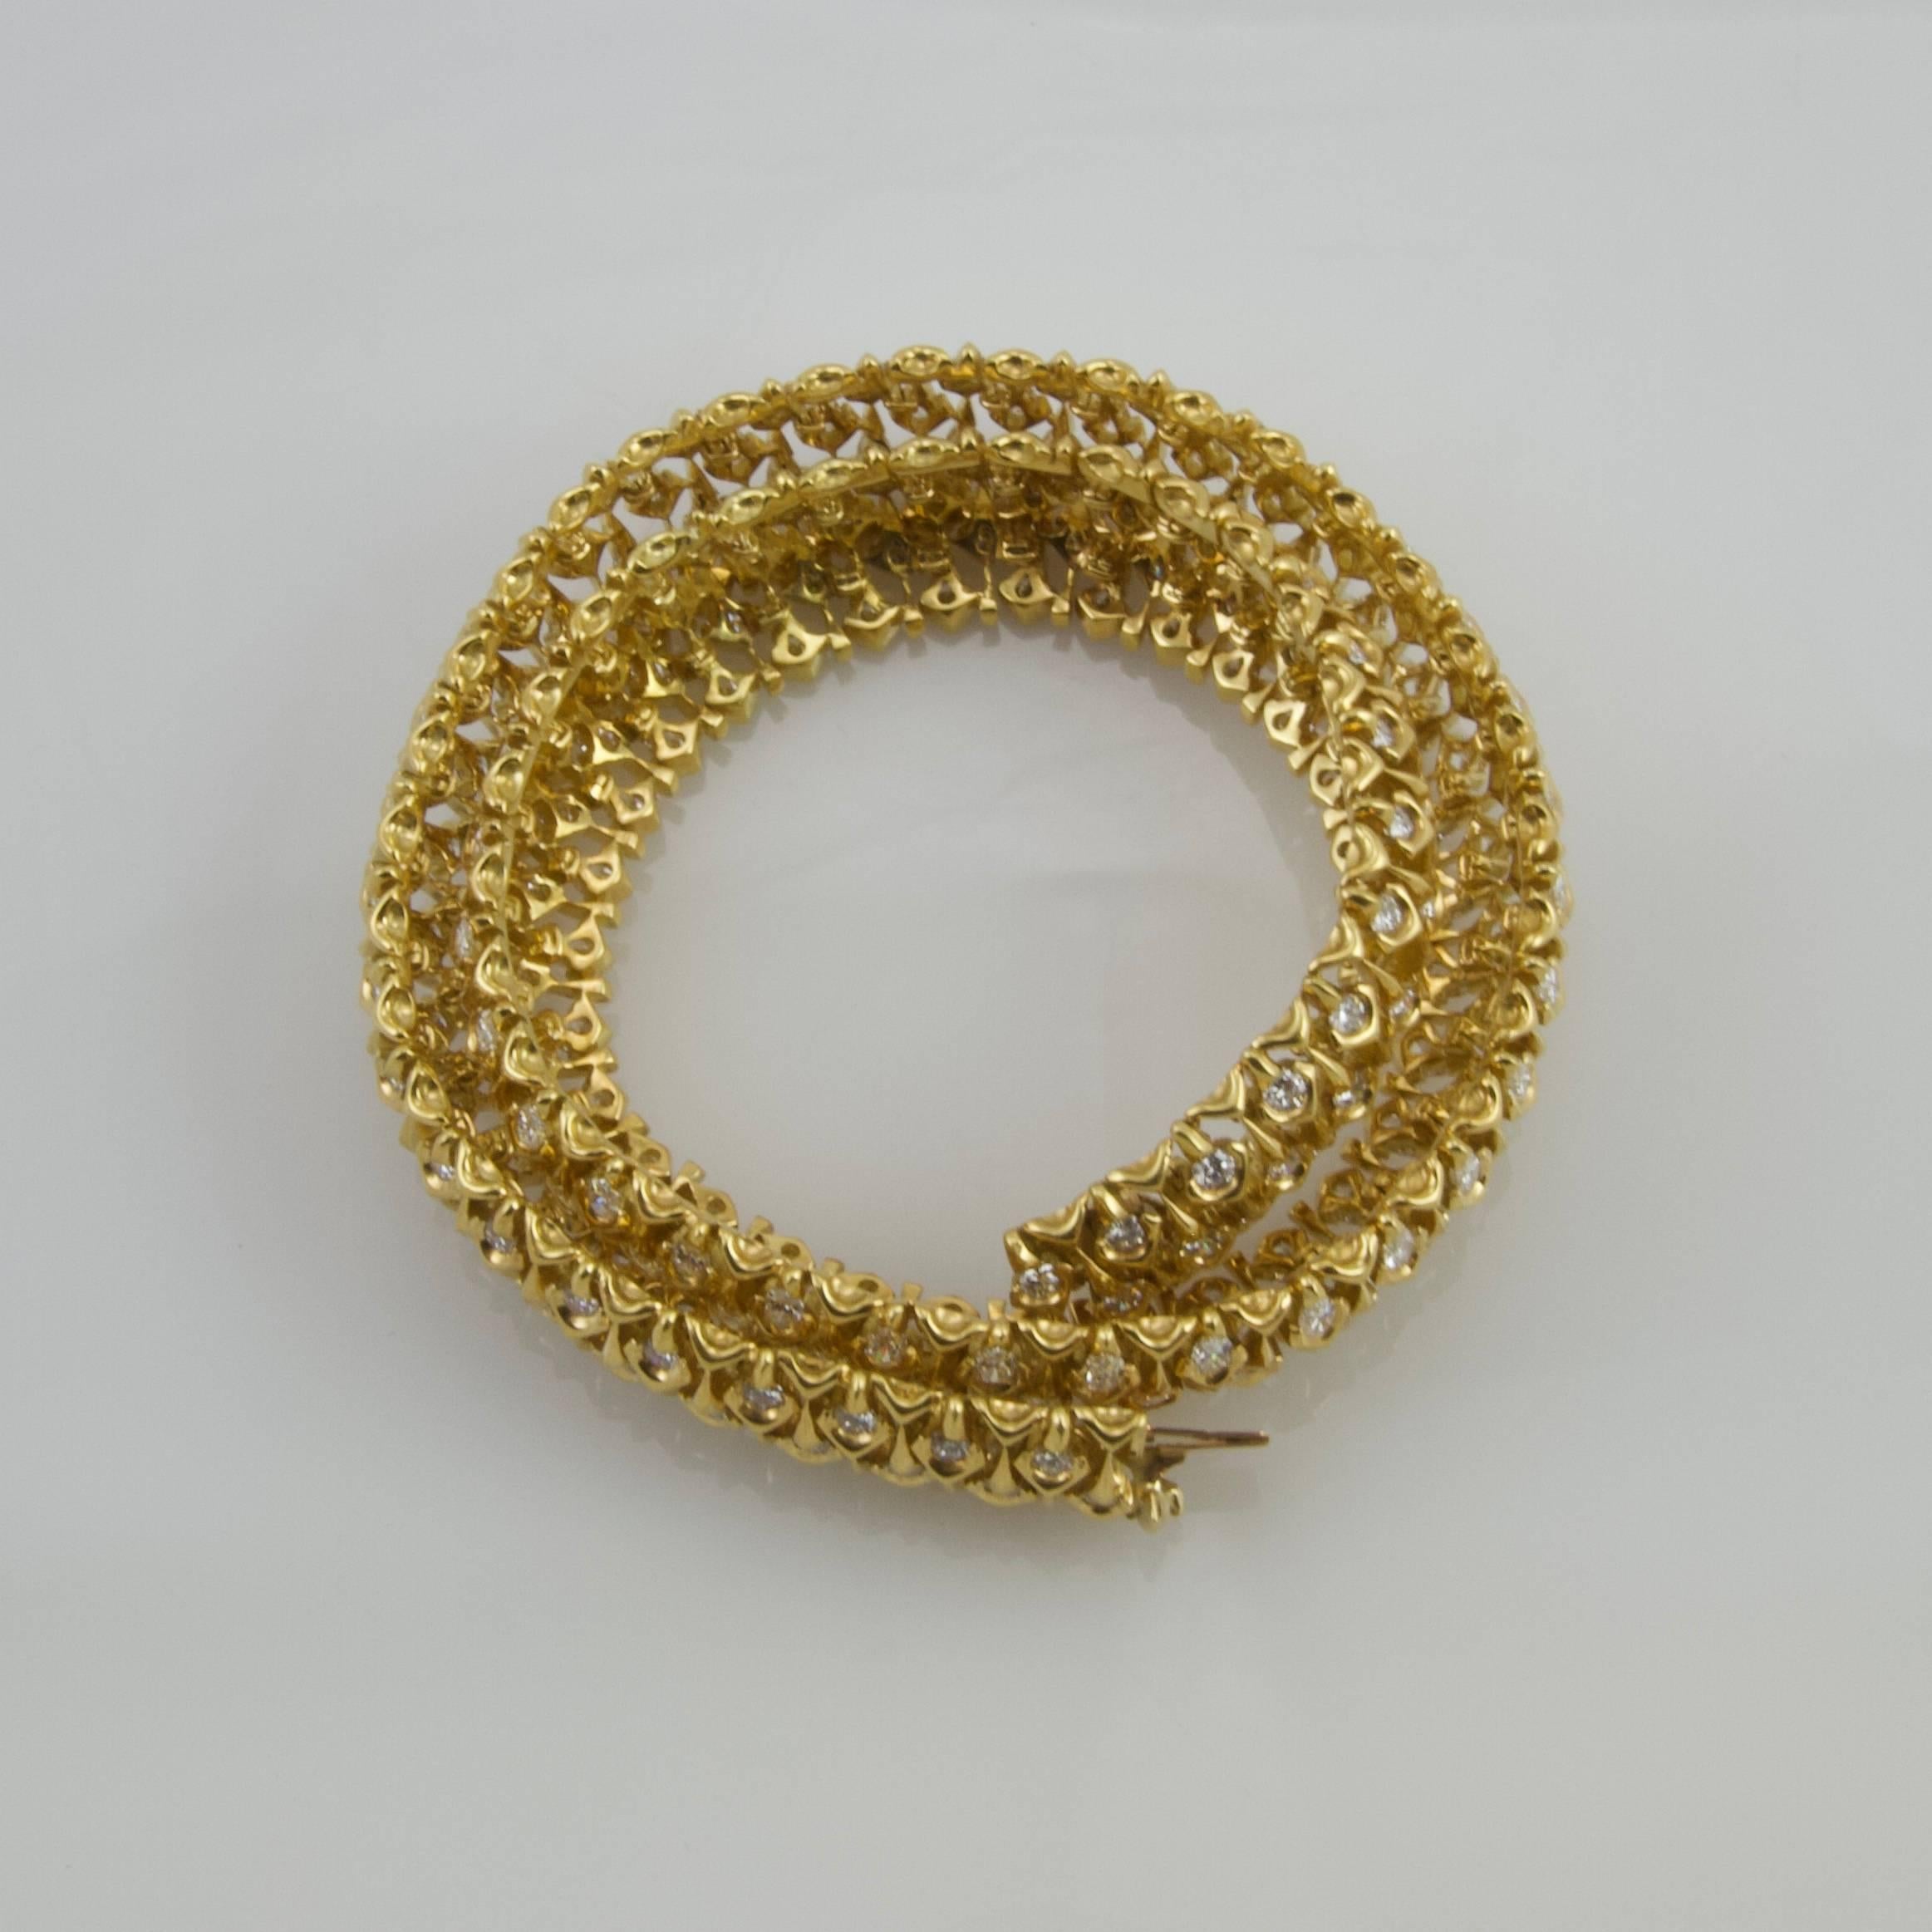 Open weave 18kt yellow gold necklace adorned with pear shape diamond and brilliant cut diamond. 
Weight of diamonds approximately 20 carats.
French work circa 1970.
Maker's mark of Mauboussin. Numeroted and signed Mauboussin. Famous jeweler in Paris